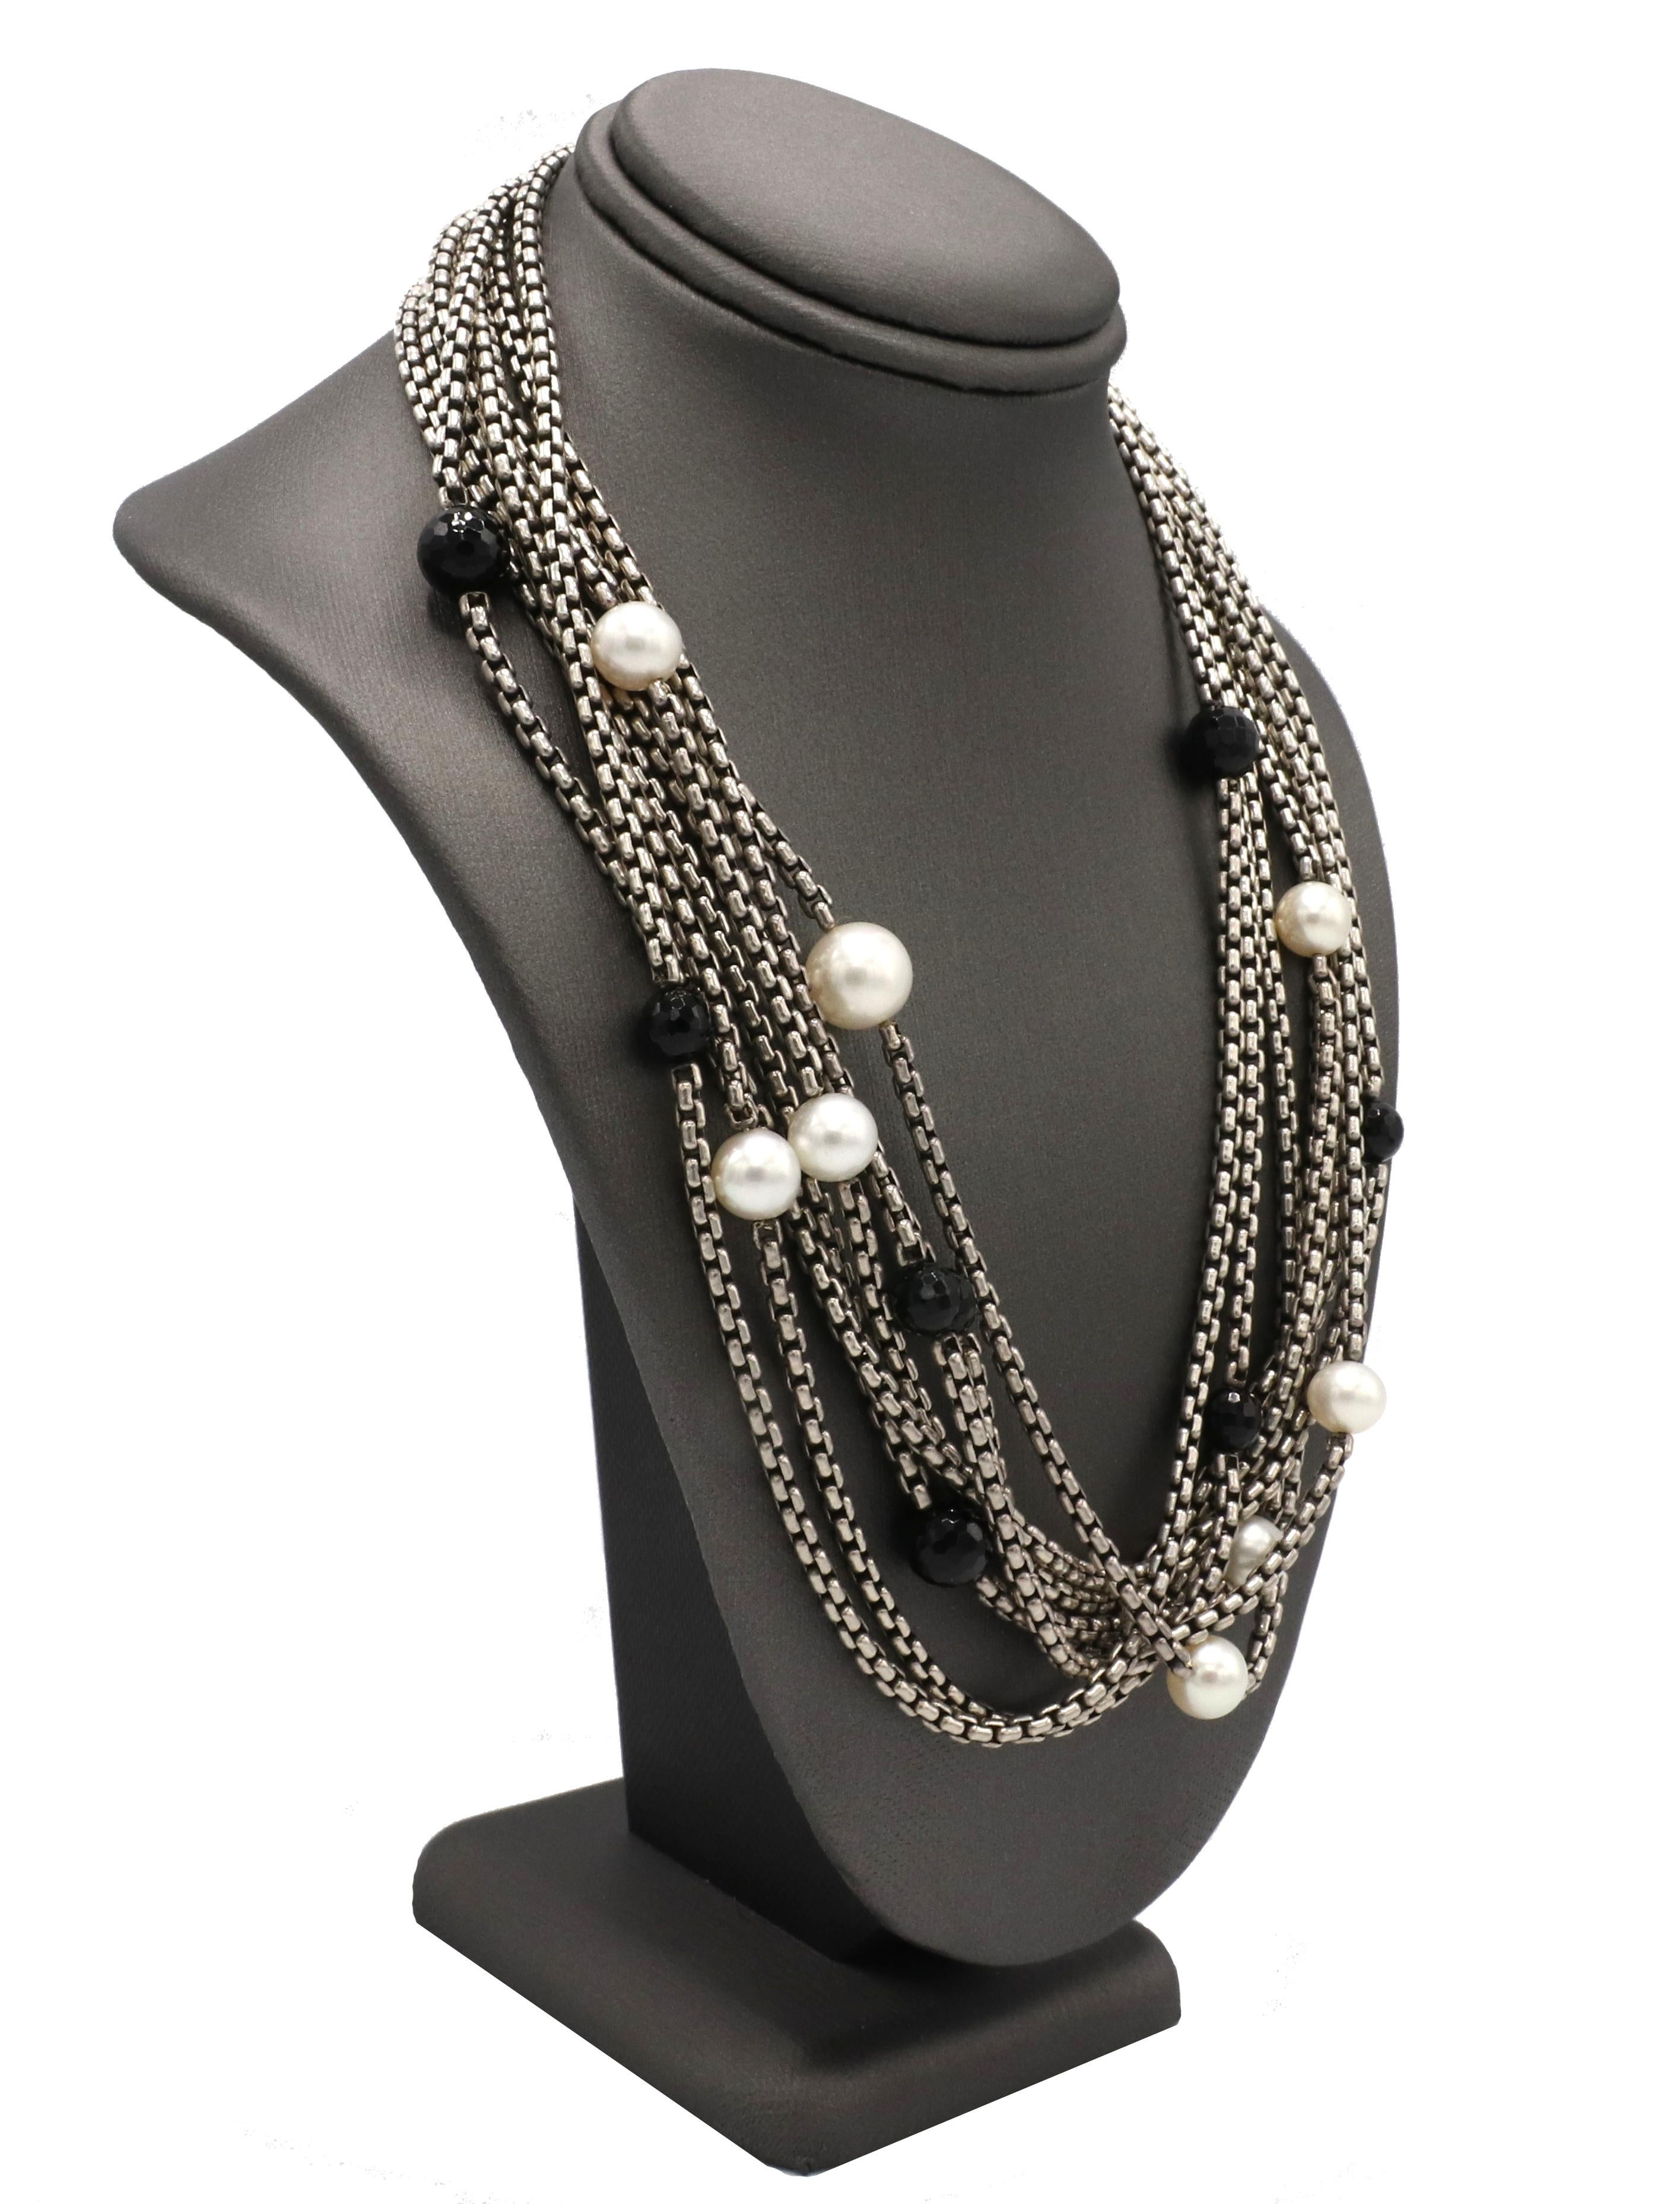 David Yurman Sterling Silver & 18K Yellow Gold 8-Row Box Chain Pearl & Onyx Bead Necklace
Metal: Sterling silver & 18k yellow gold
Weight: 103.23 grams
Length: 16 inches
Width: Approx. 1 inches
Chain width: 2.7mm
Signed: ©D.Y. 925 750 